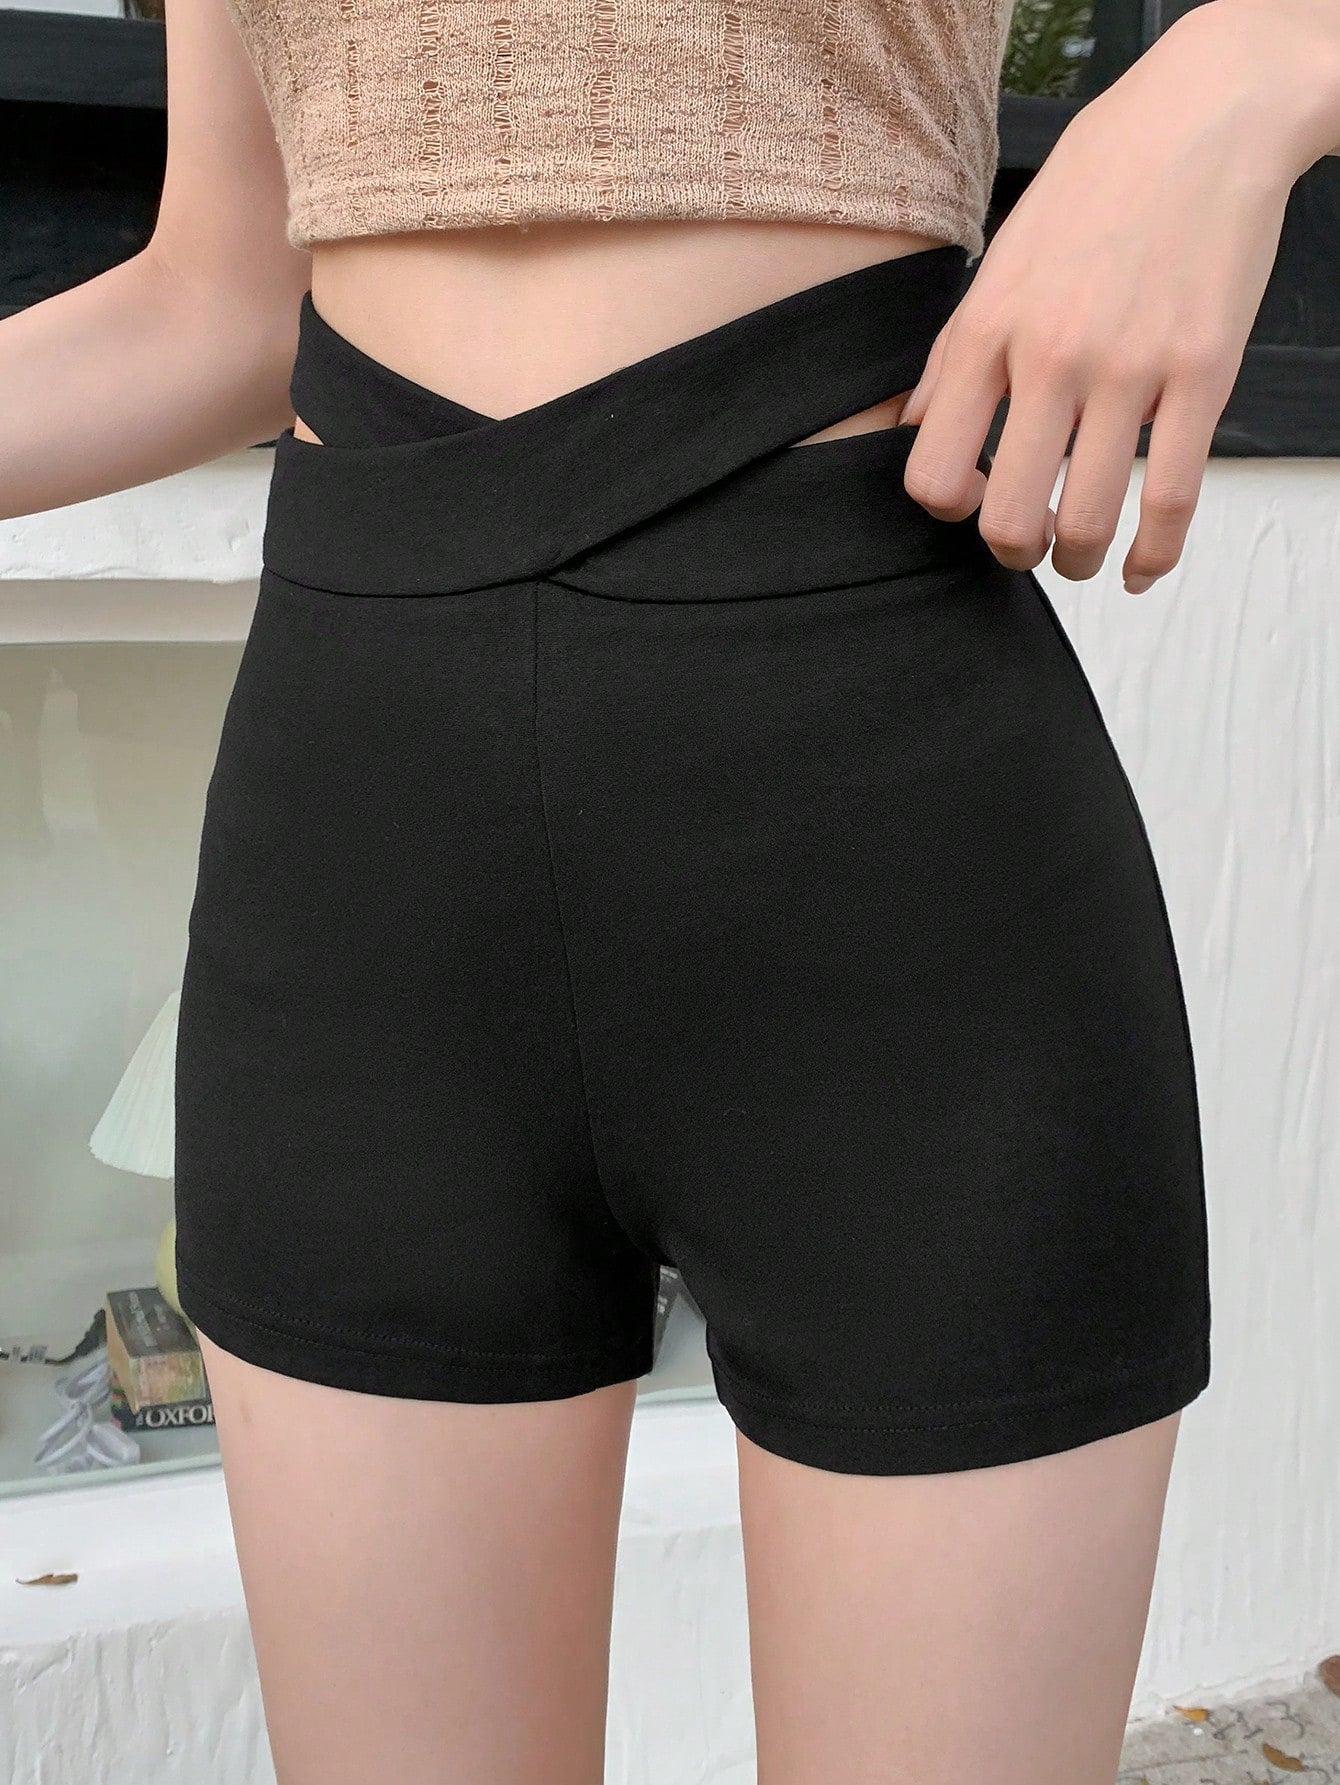 Women's Casual Slim Fit Shorts With Cross Design At Waist